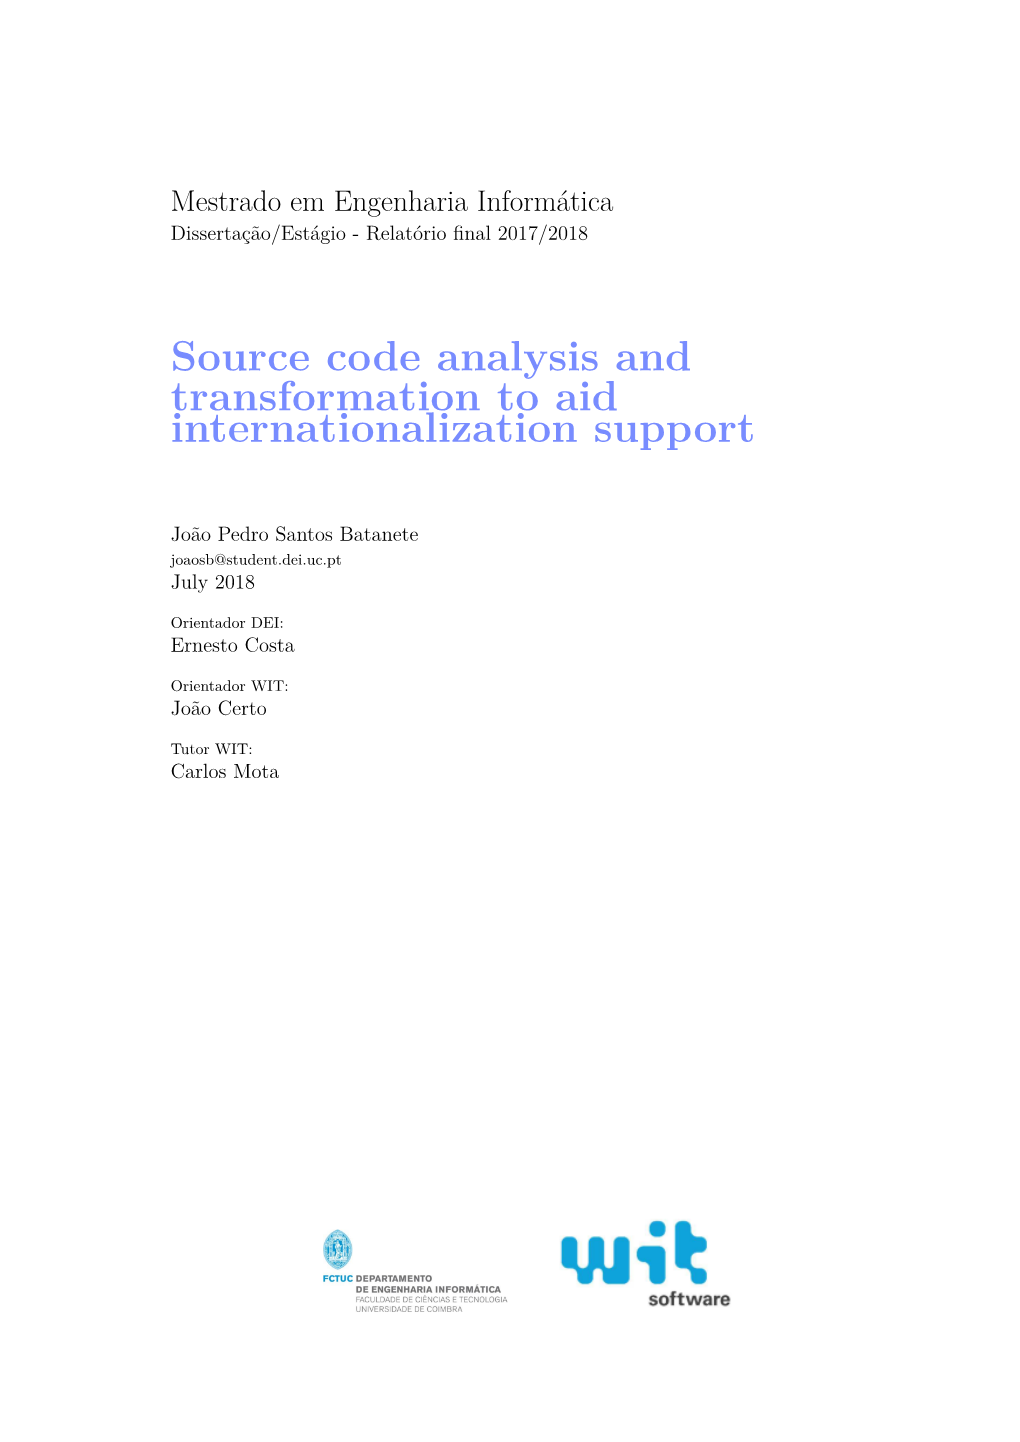 Source Code Analysis and Transformation to Aid Internationalization Support